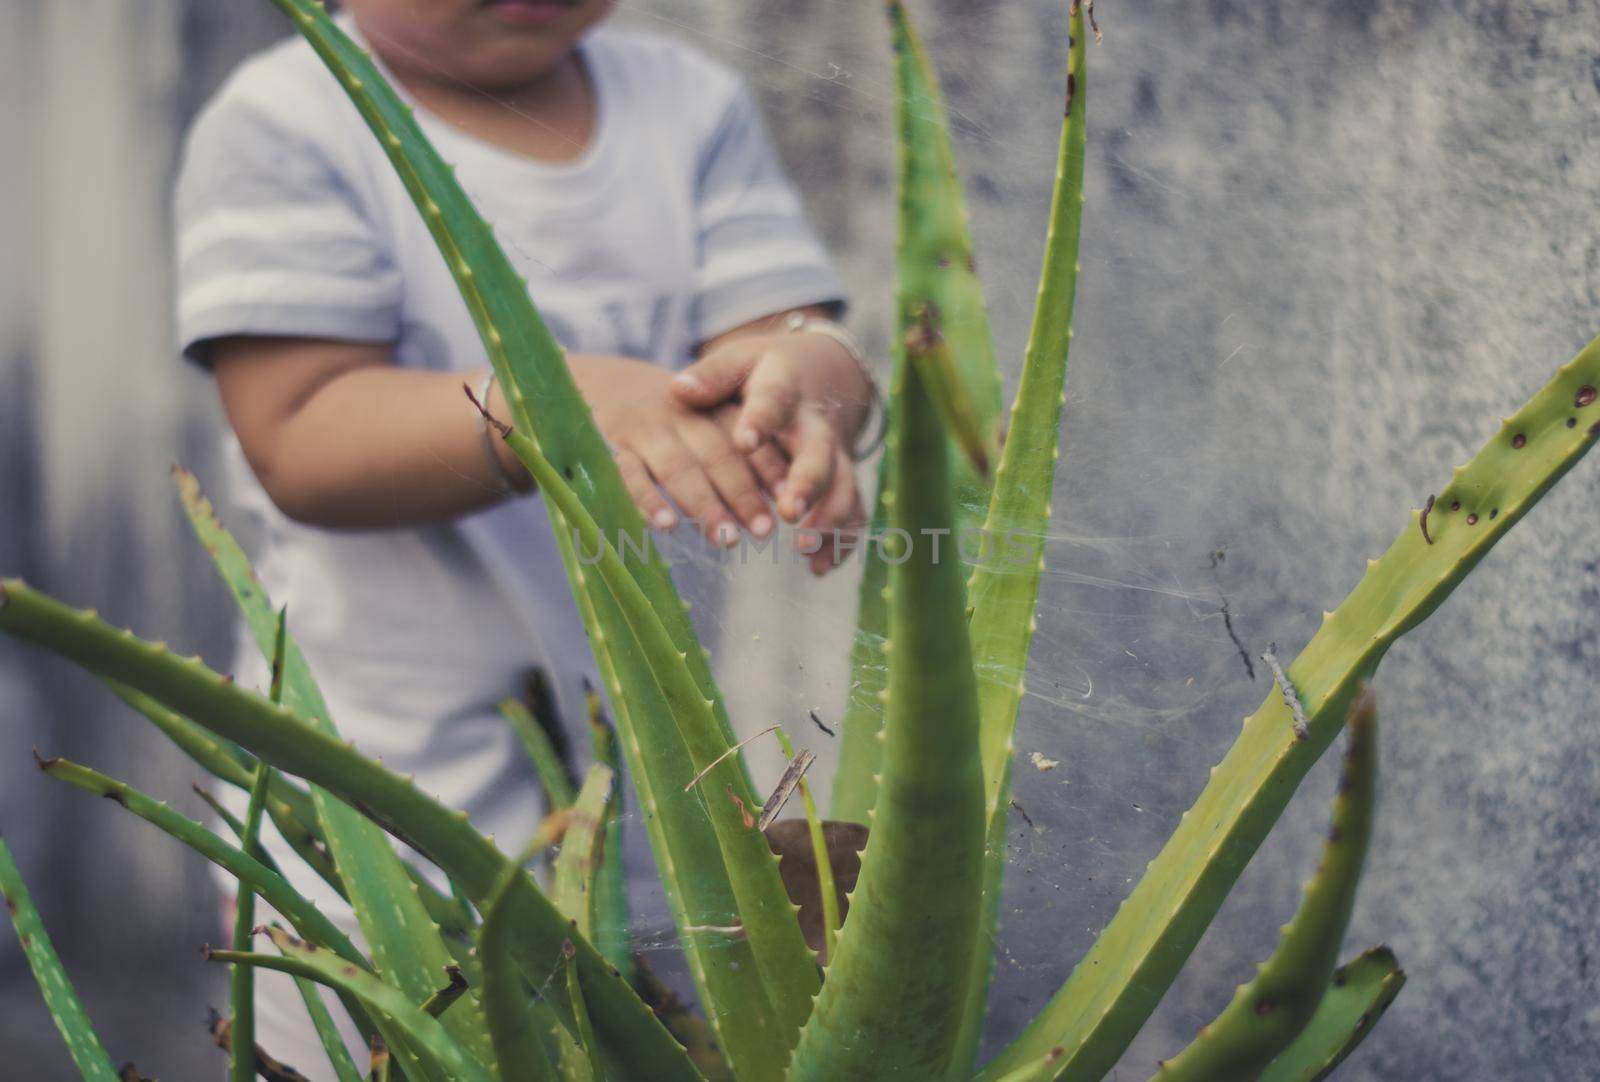 Close up of poisonous thorny plant leaves against baby hand in the background. by sudiptabhowmick